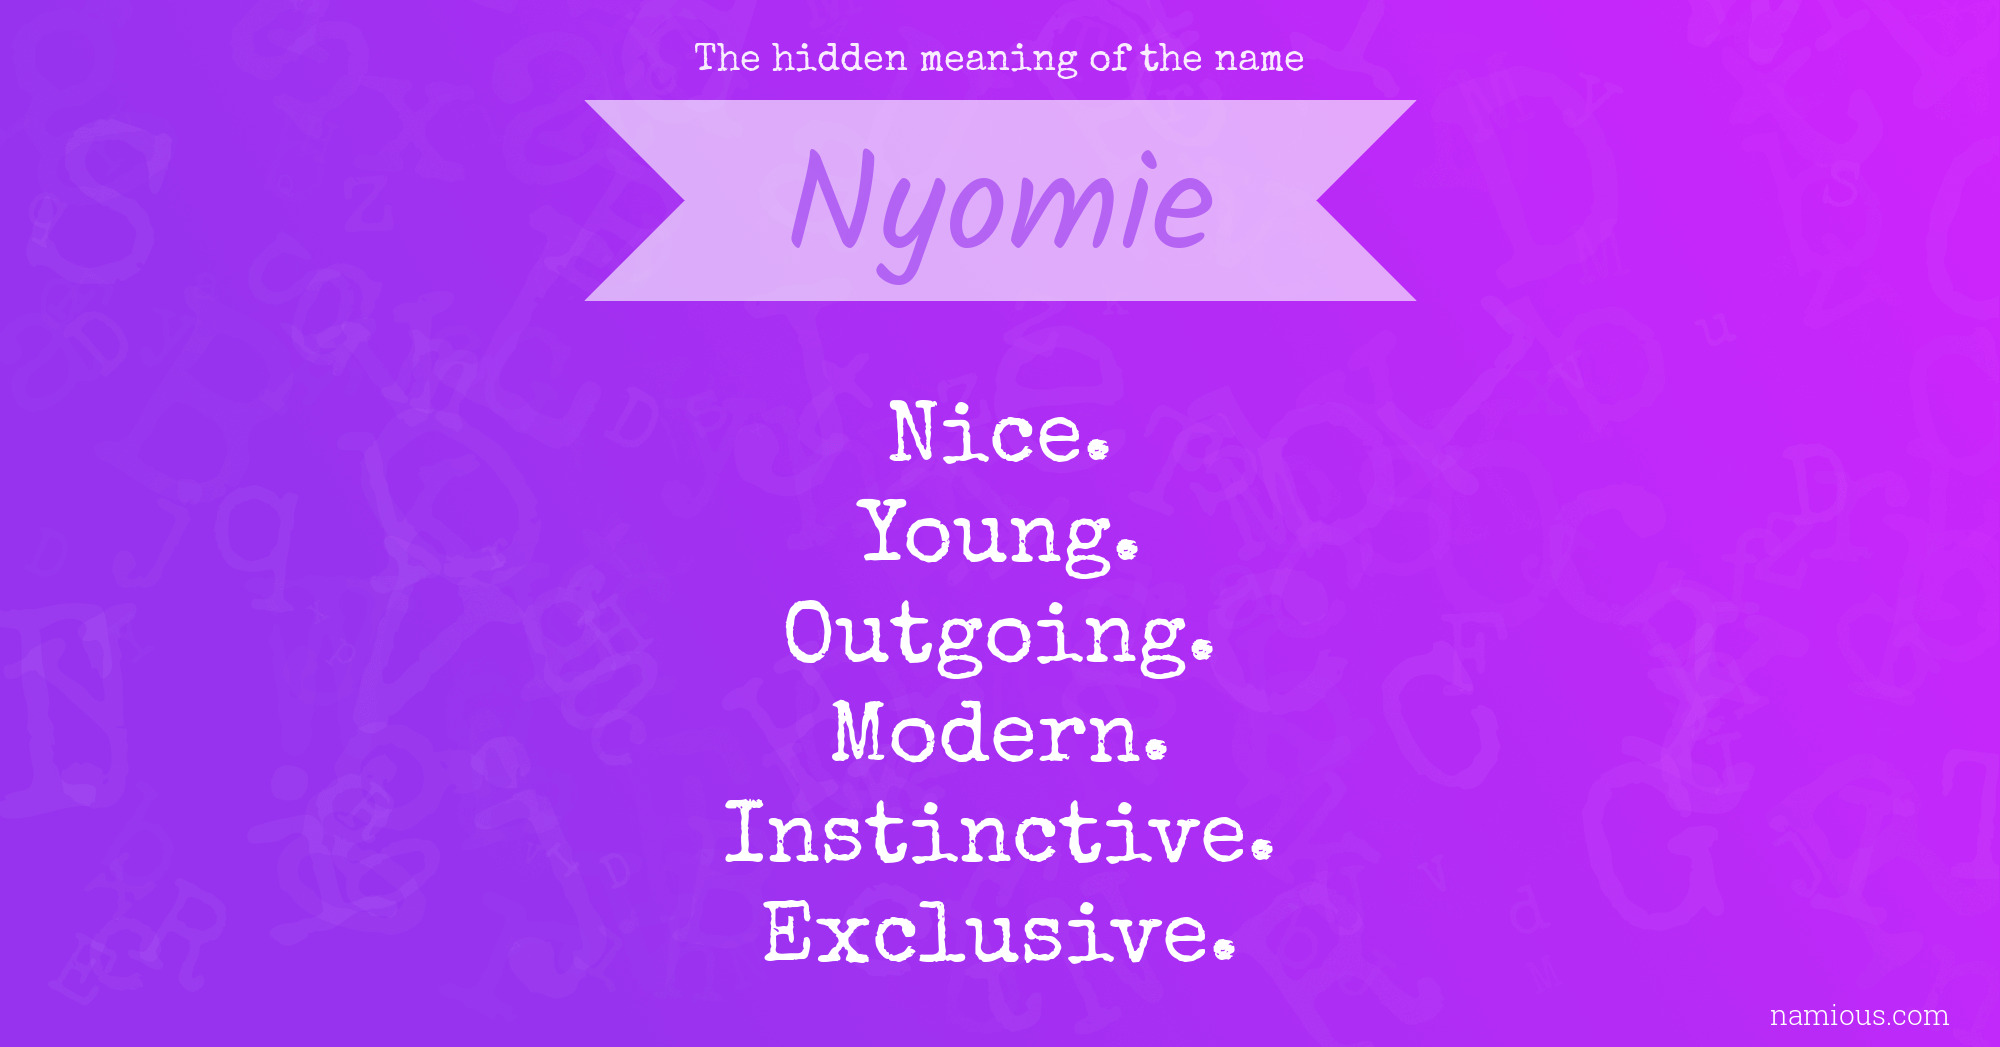 The hidden meaning of the name Nyomie